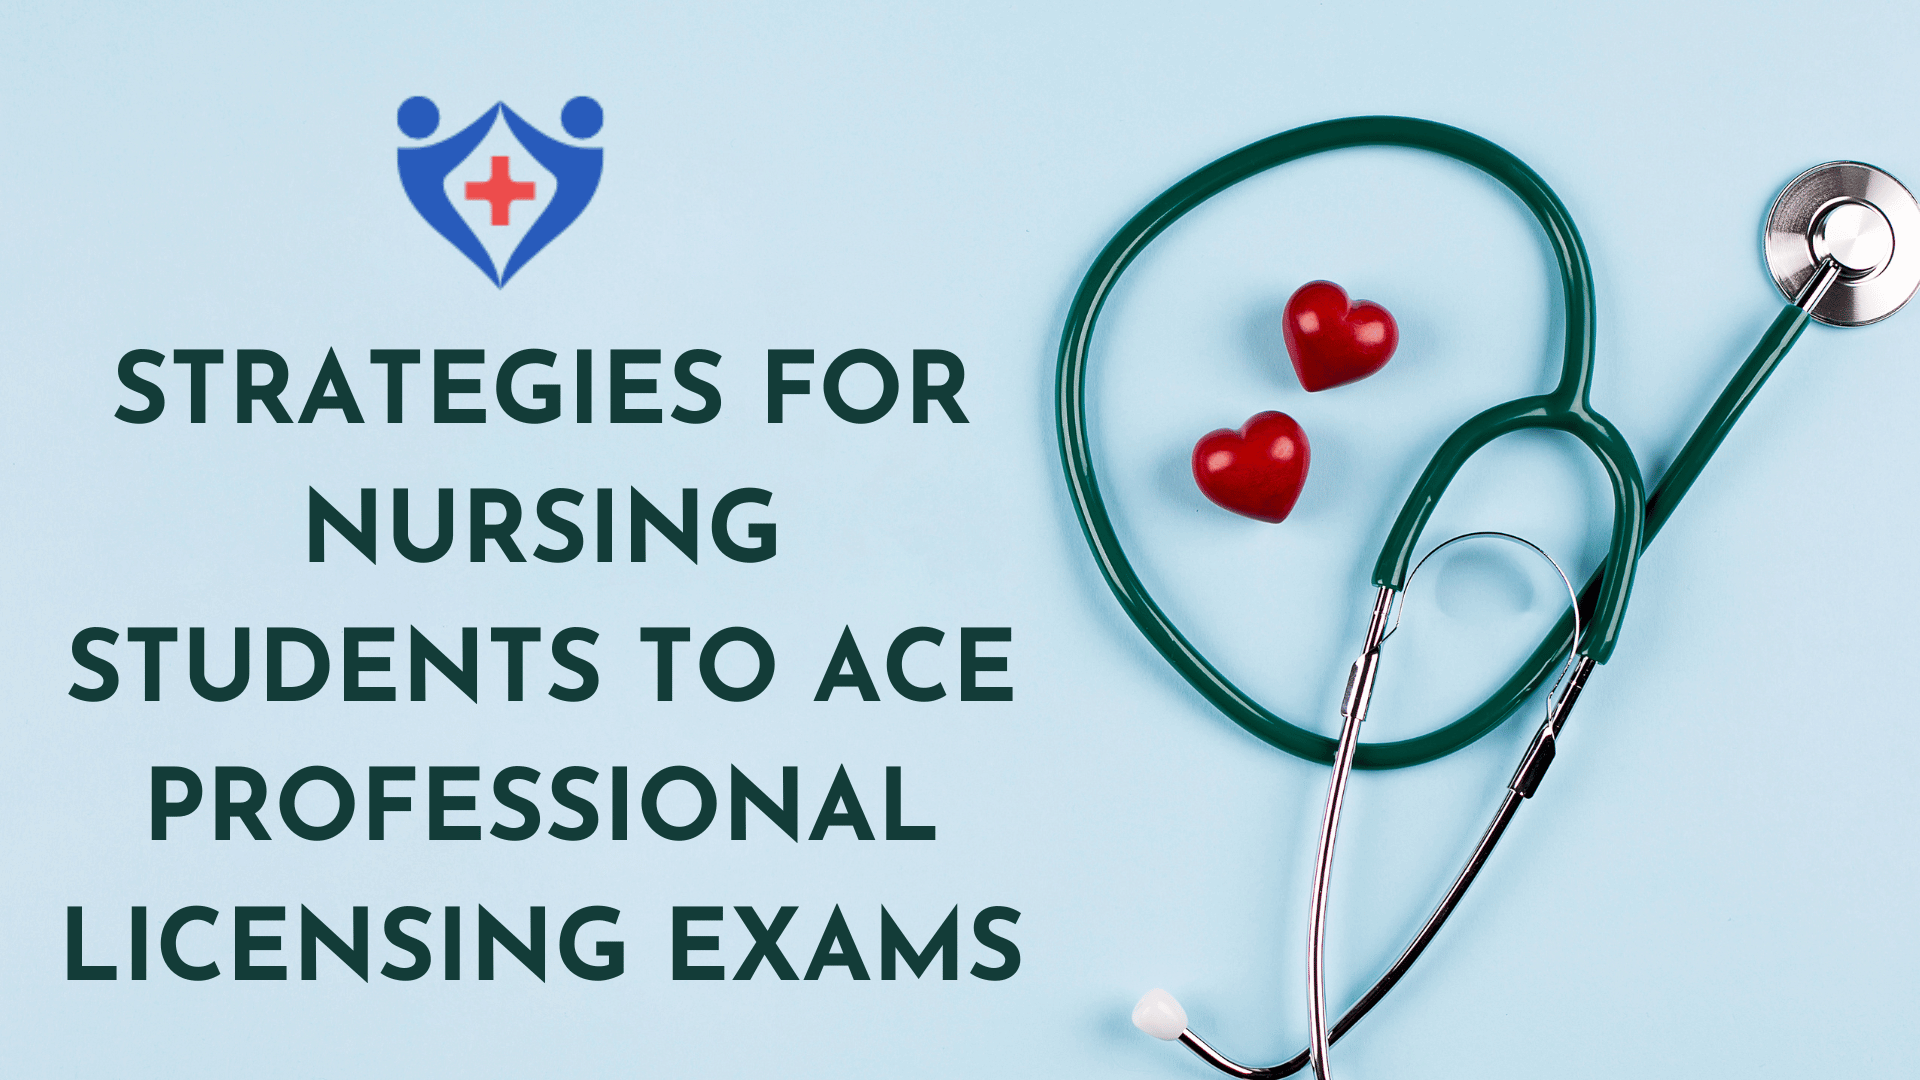 Strategies for Nursing Students to Ace Professional Licensing Exams